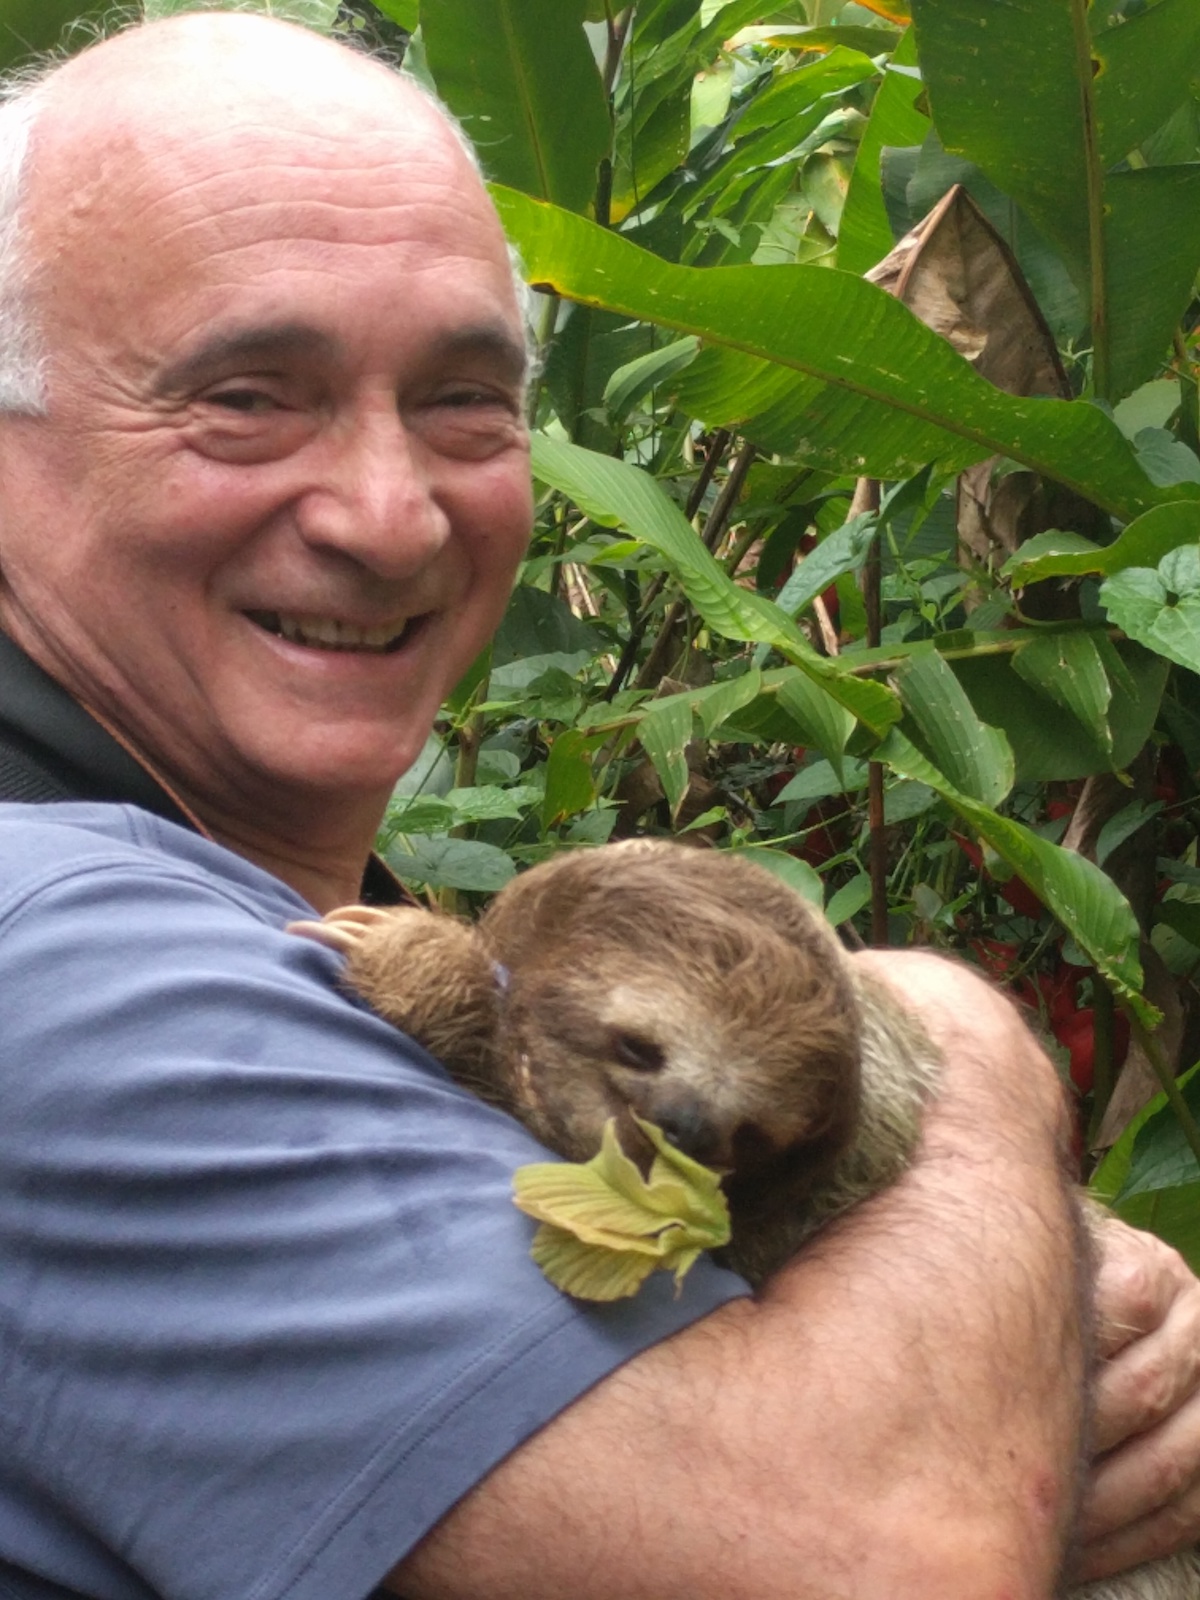 A middle-aged man smiles as he holds a baby sloth in Costa Rica.